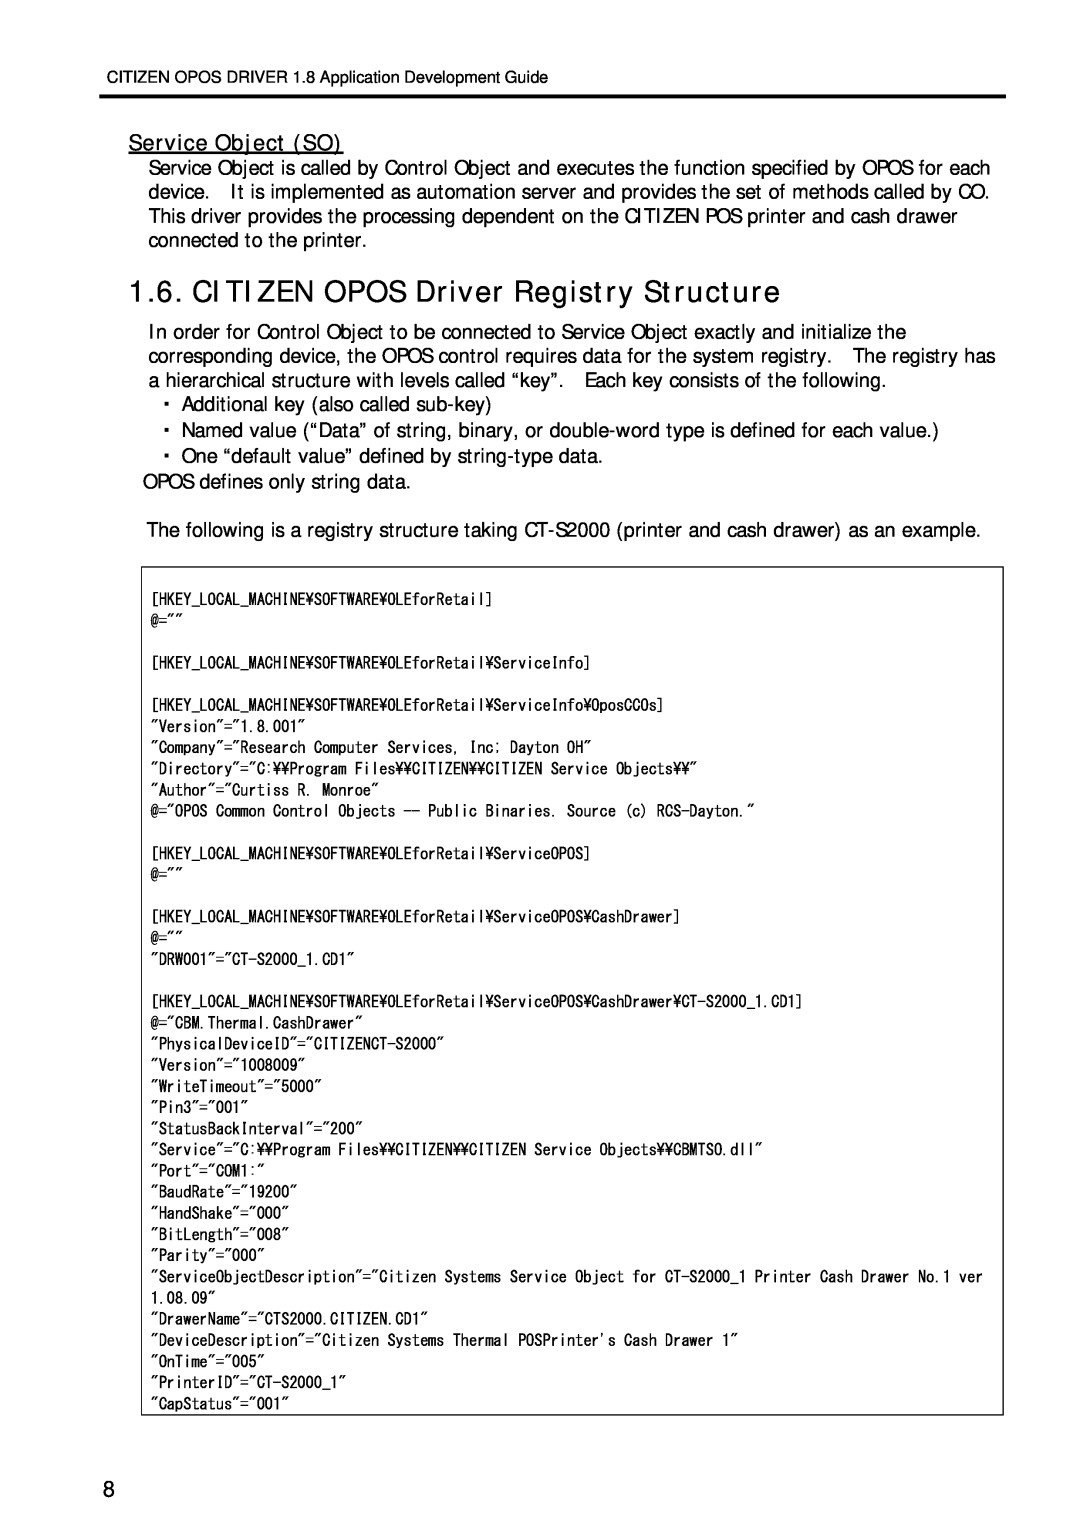 Citizen Systems 1.8 manual CITIZEN OPOS Driver Registry Structure, Service Object SO 